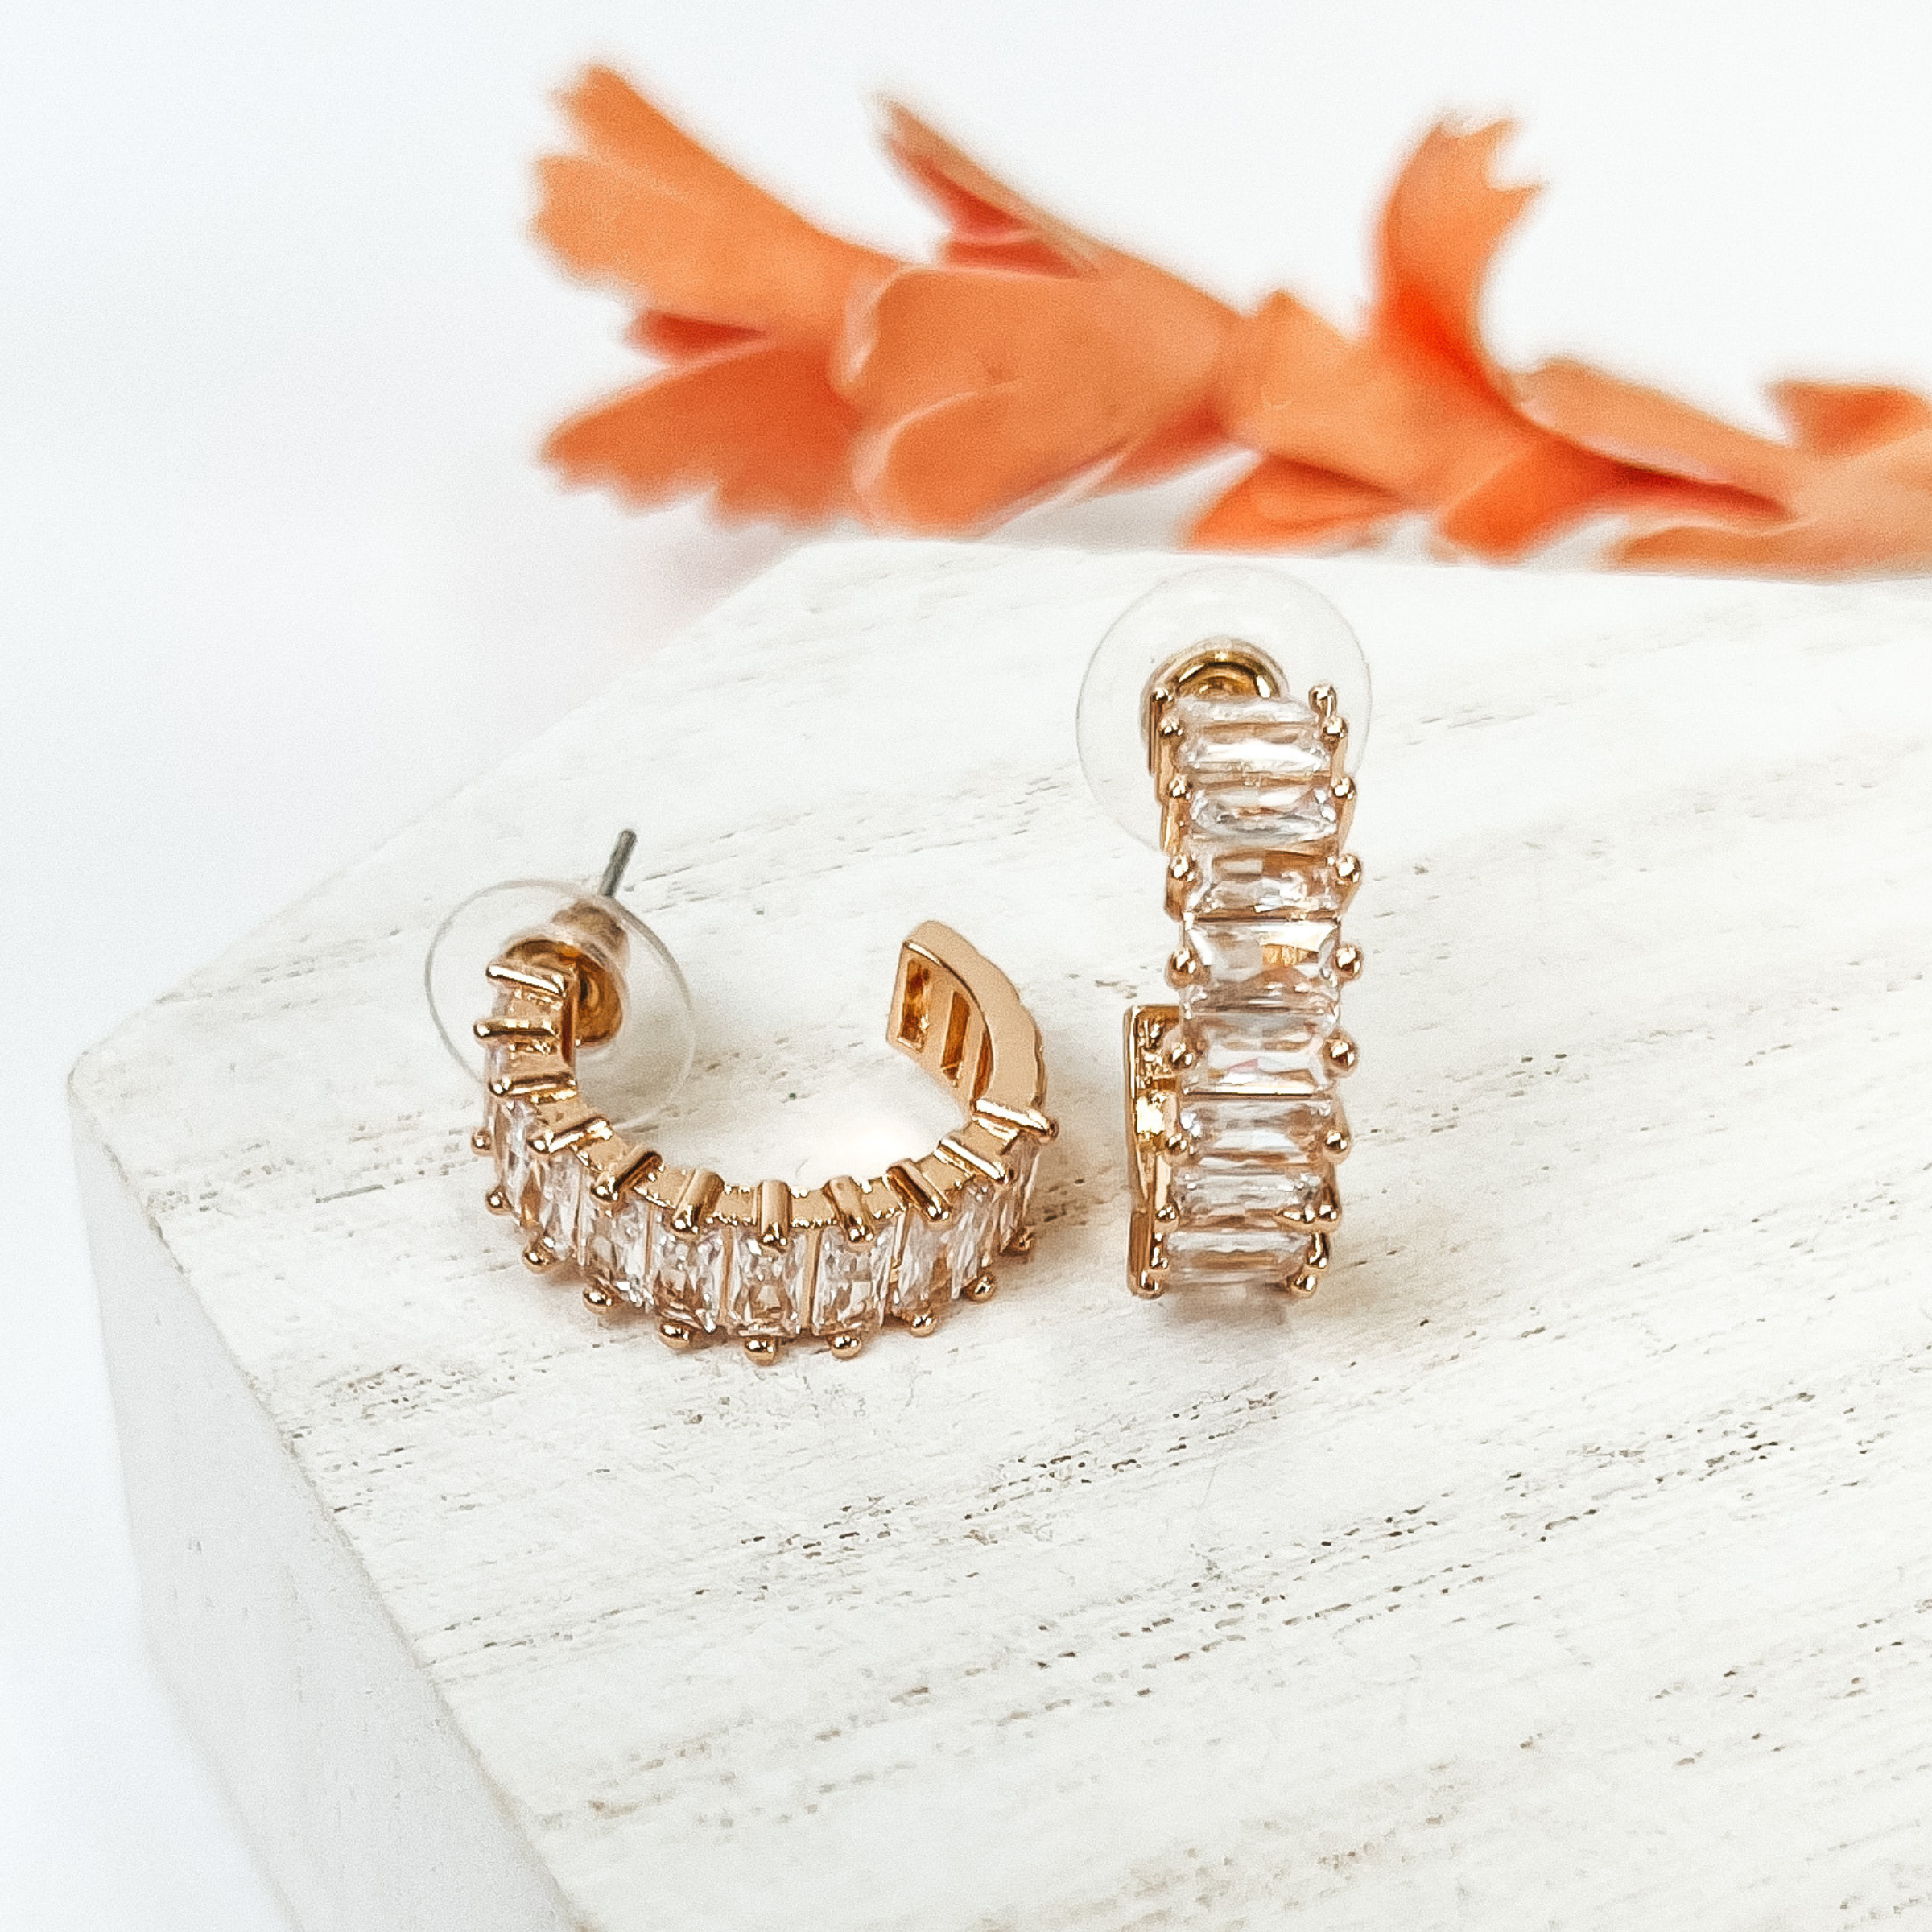 Gold hoop earrings with rectangle clear crystals. These earrings are pictured on a white background with an orange flower behind them. 